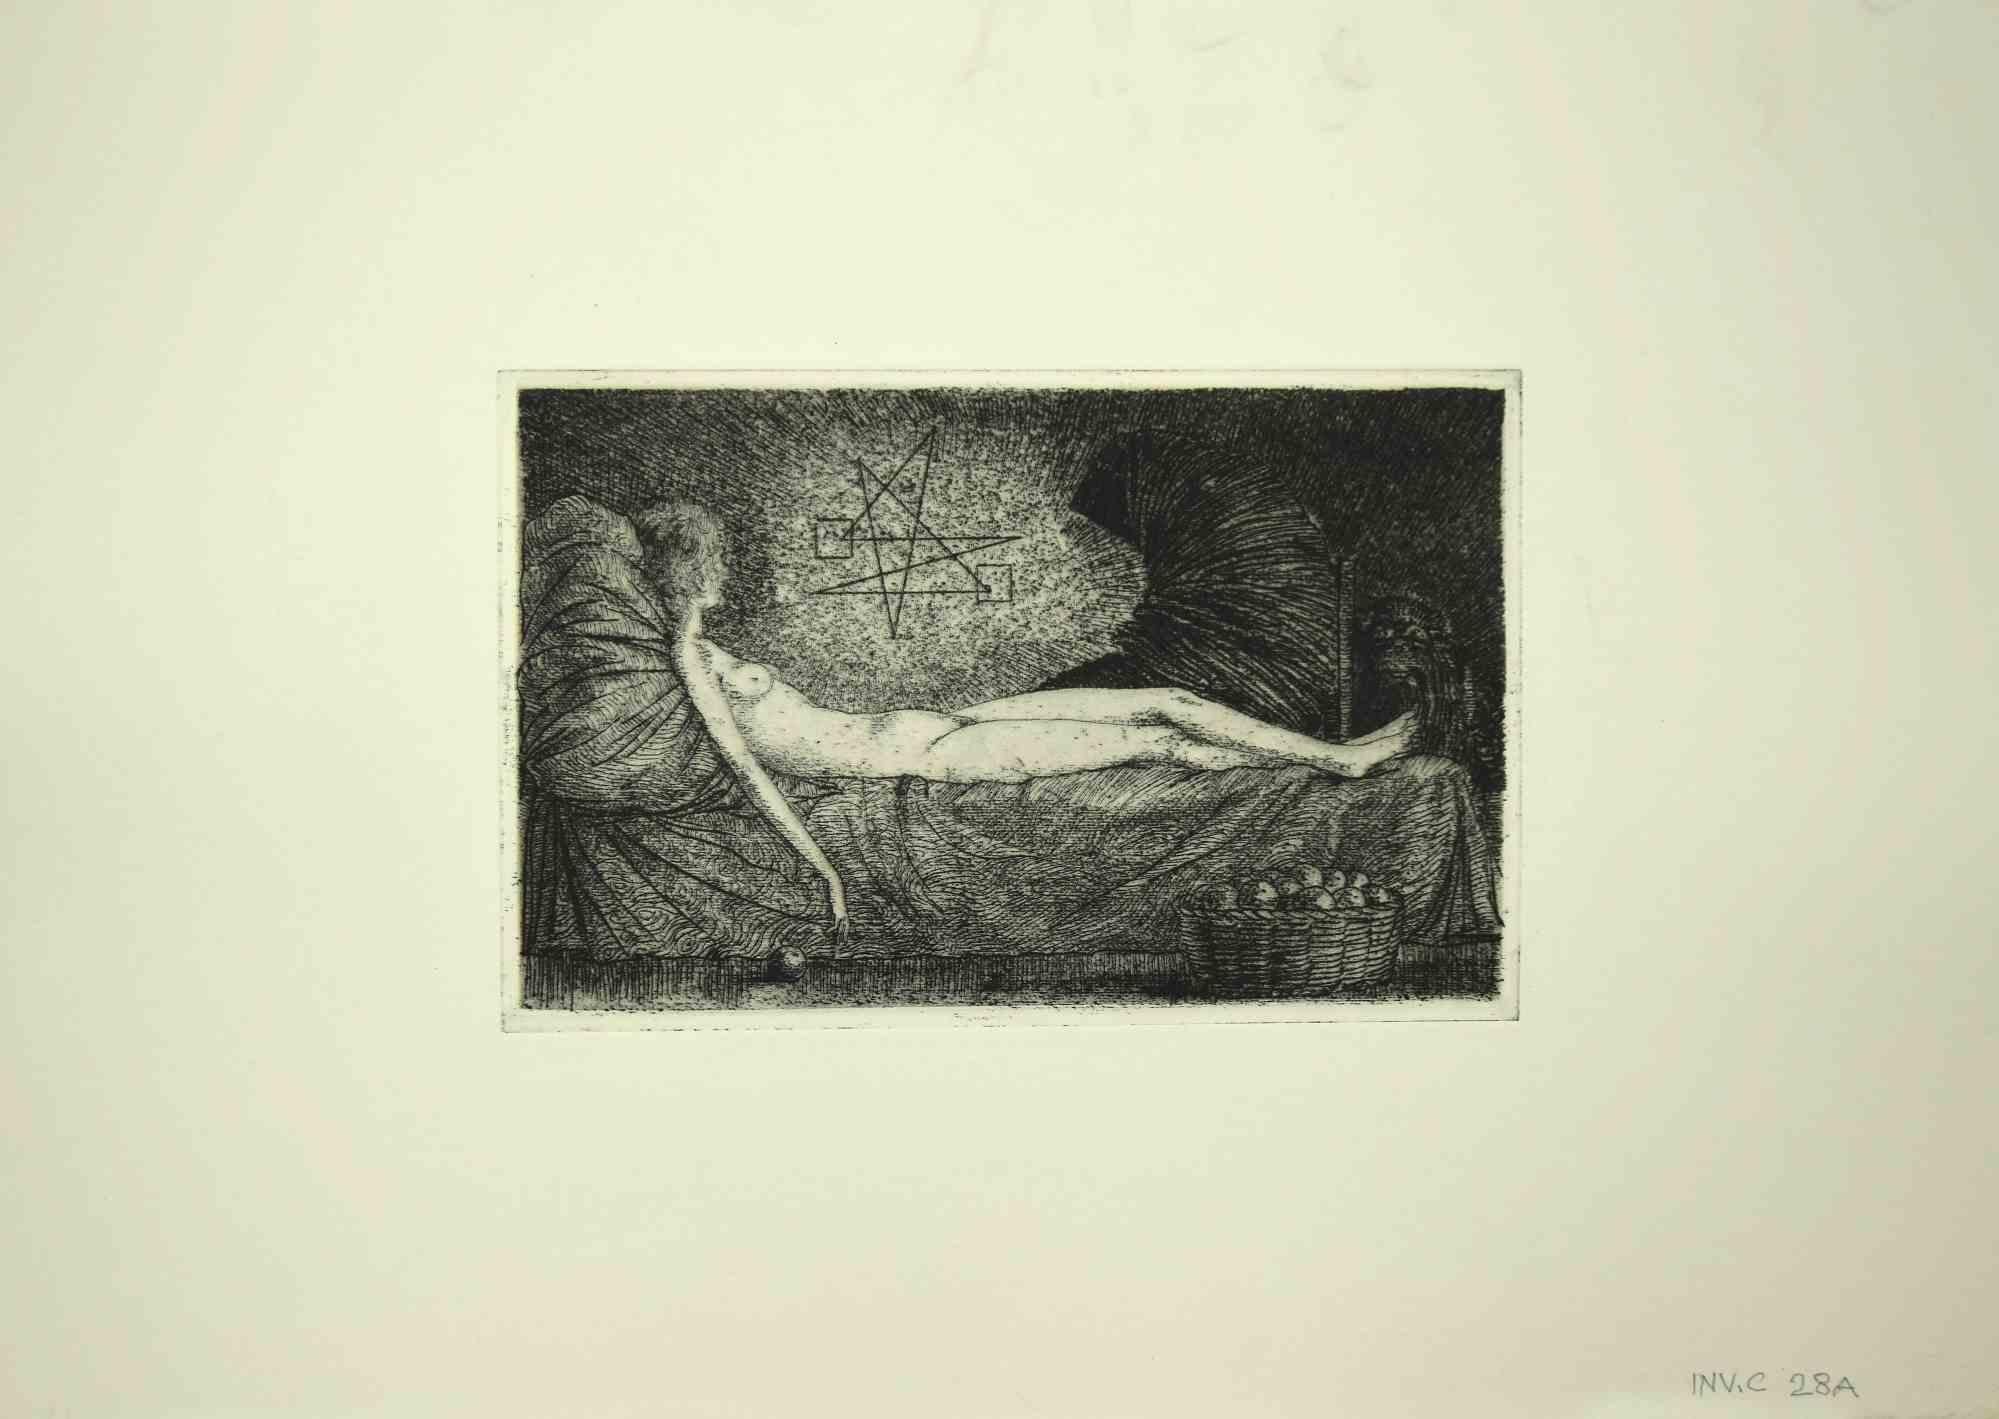 Reclined Nude - Original Etching by Leo Guida - 1970s